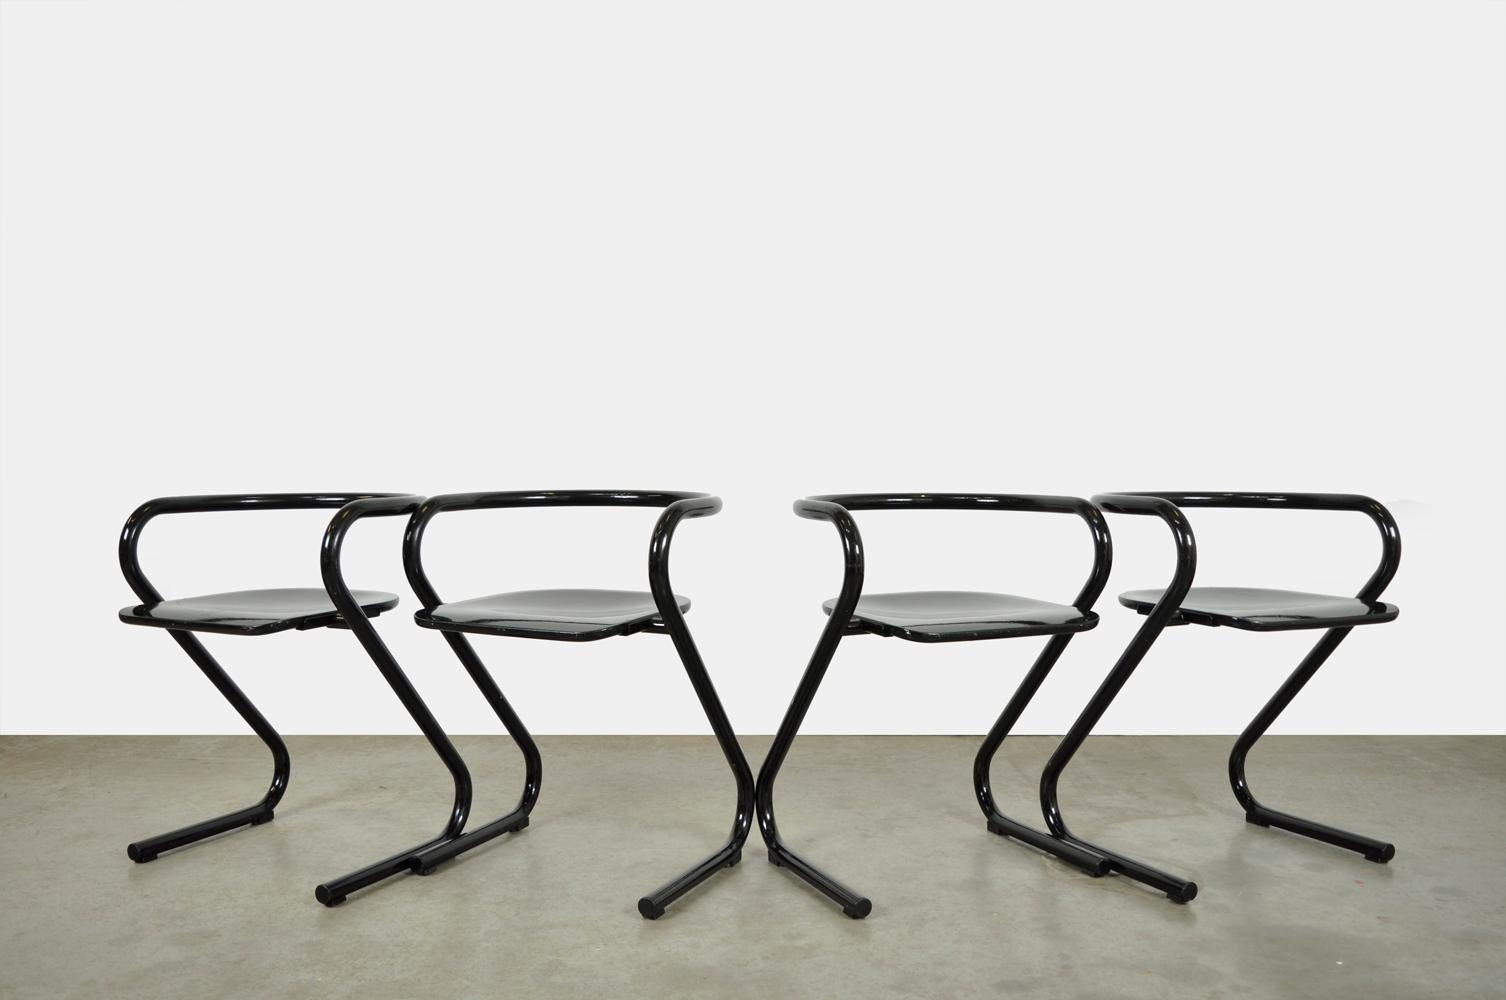 Set of 4 special dining chairs / table stools type S 70 by the Swedish design duo Börge Lindau & Bo Lindekrantz, produced by Lammhults, 1970s.

The stools have a black coated one-piece tubular steel frame and black wooden seats.